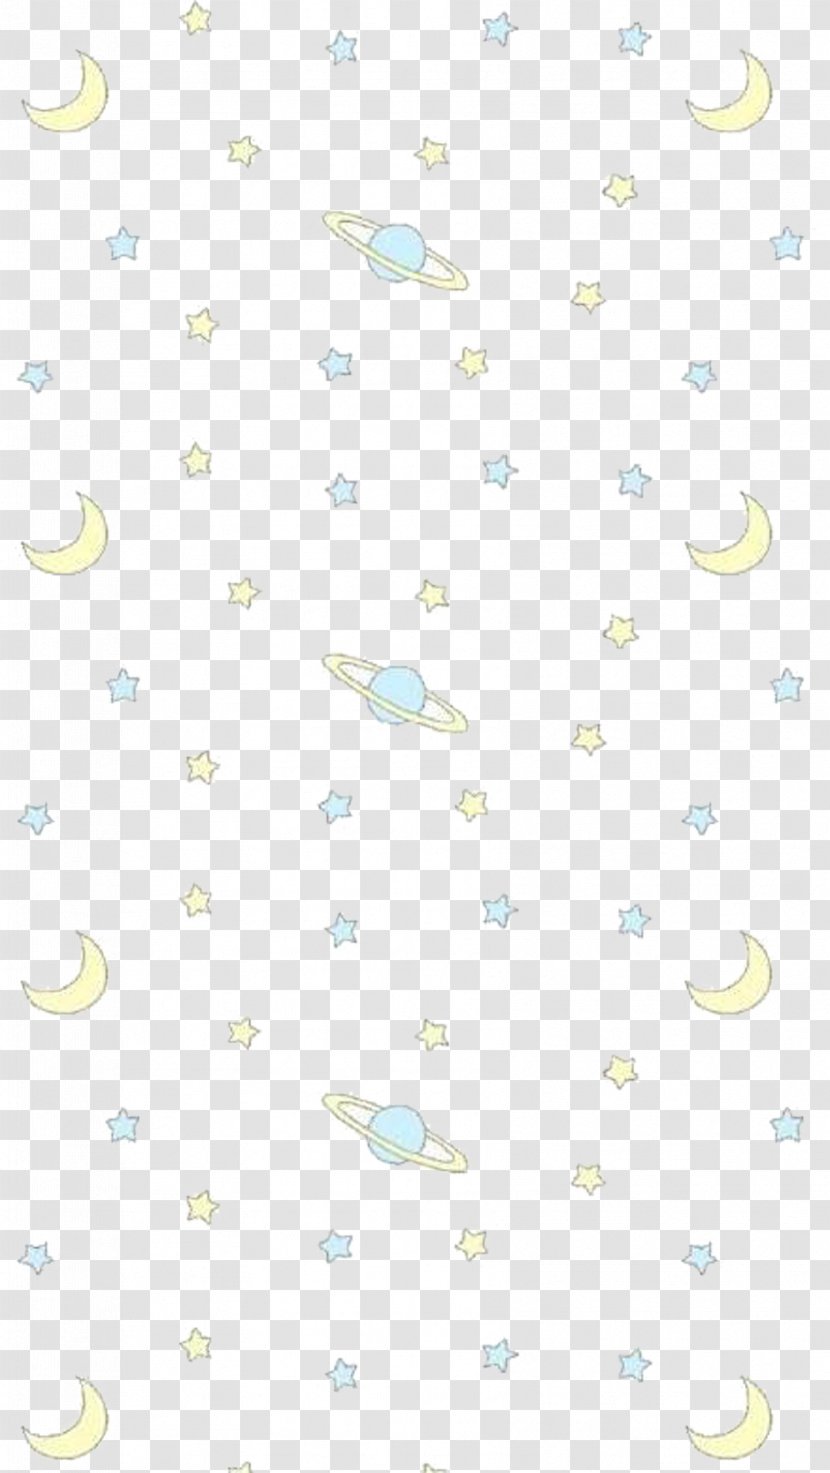 Sky Olbers Paradox Pattern - Green - Star Background Transparent PNG